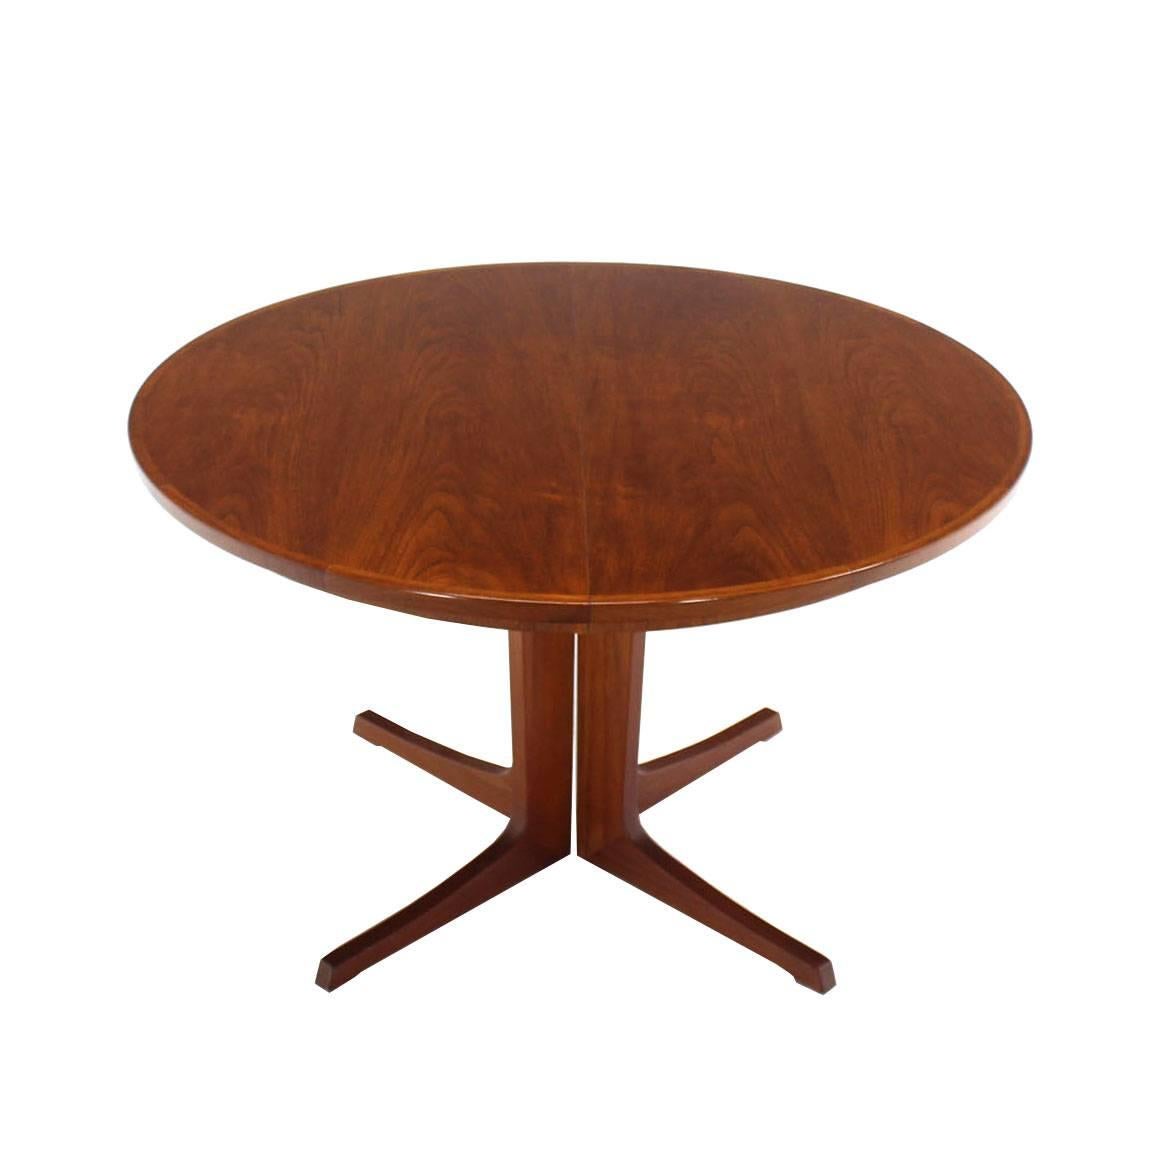 20th Century Round Danish Mid-Century Modern Teak Dining Table with Two Leaves